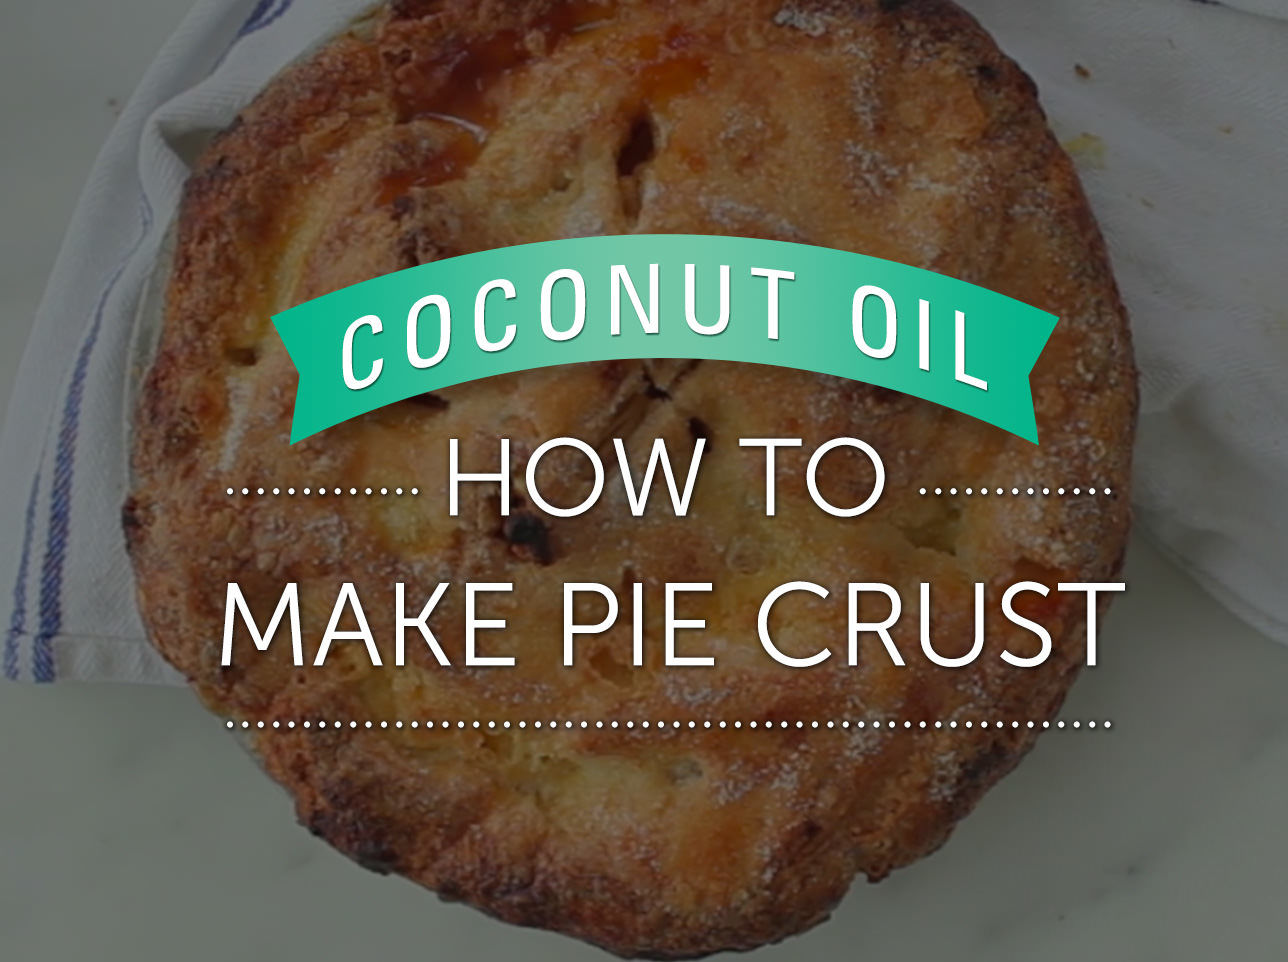 Learn how to make pie crust with LouAna Coconut Oil.